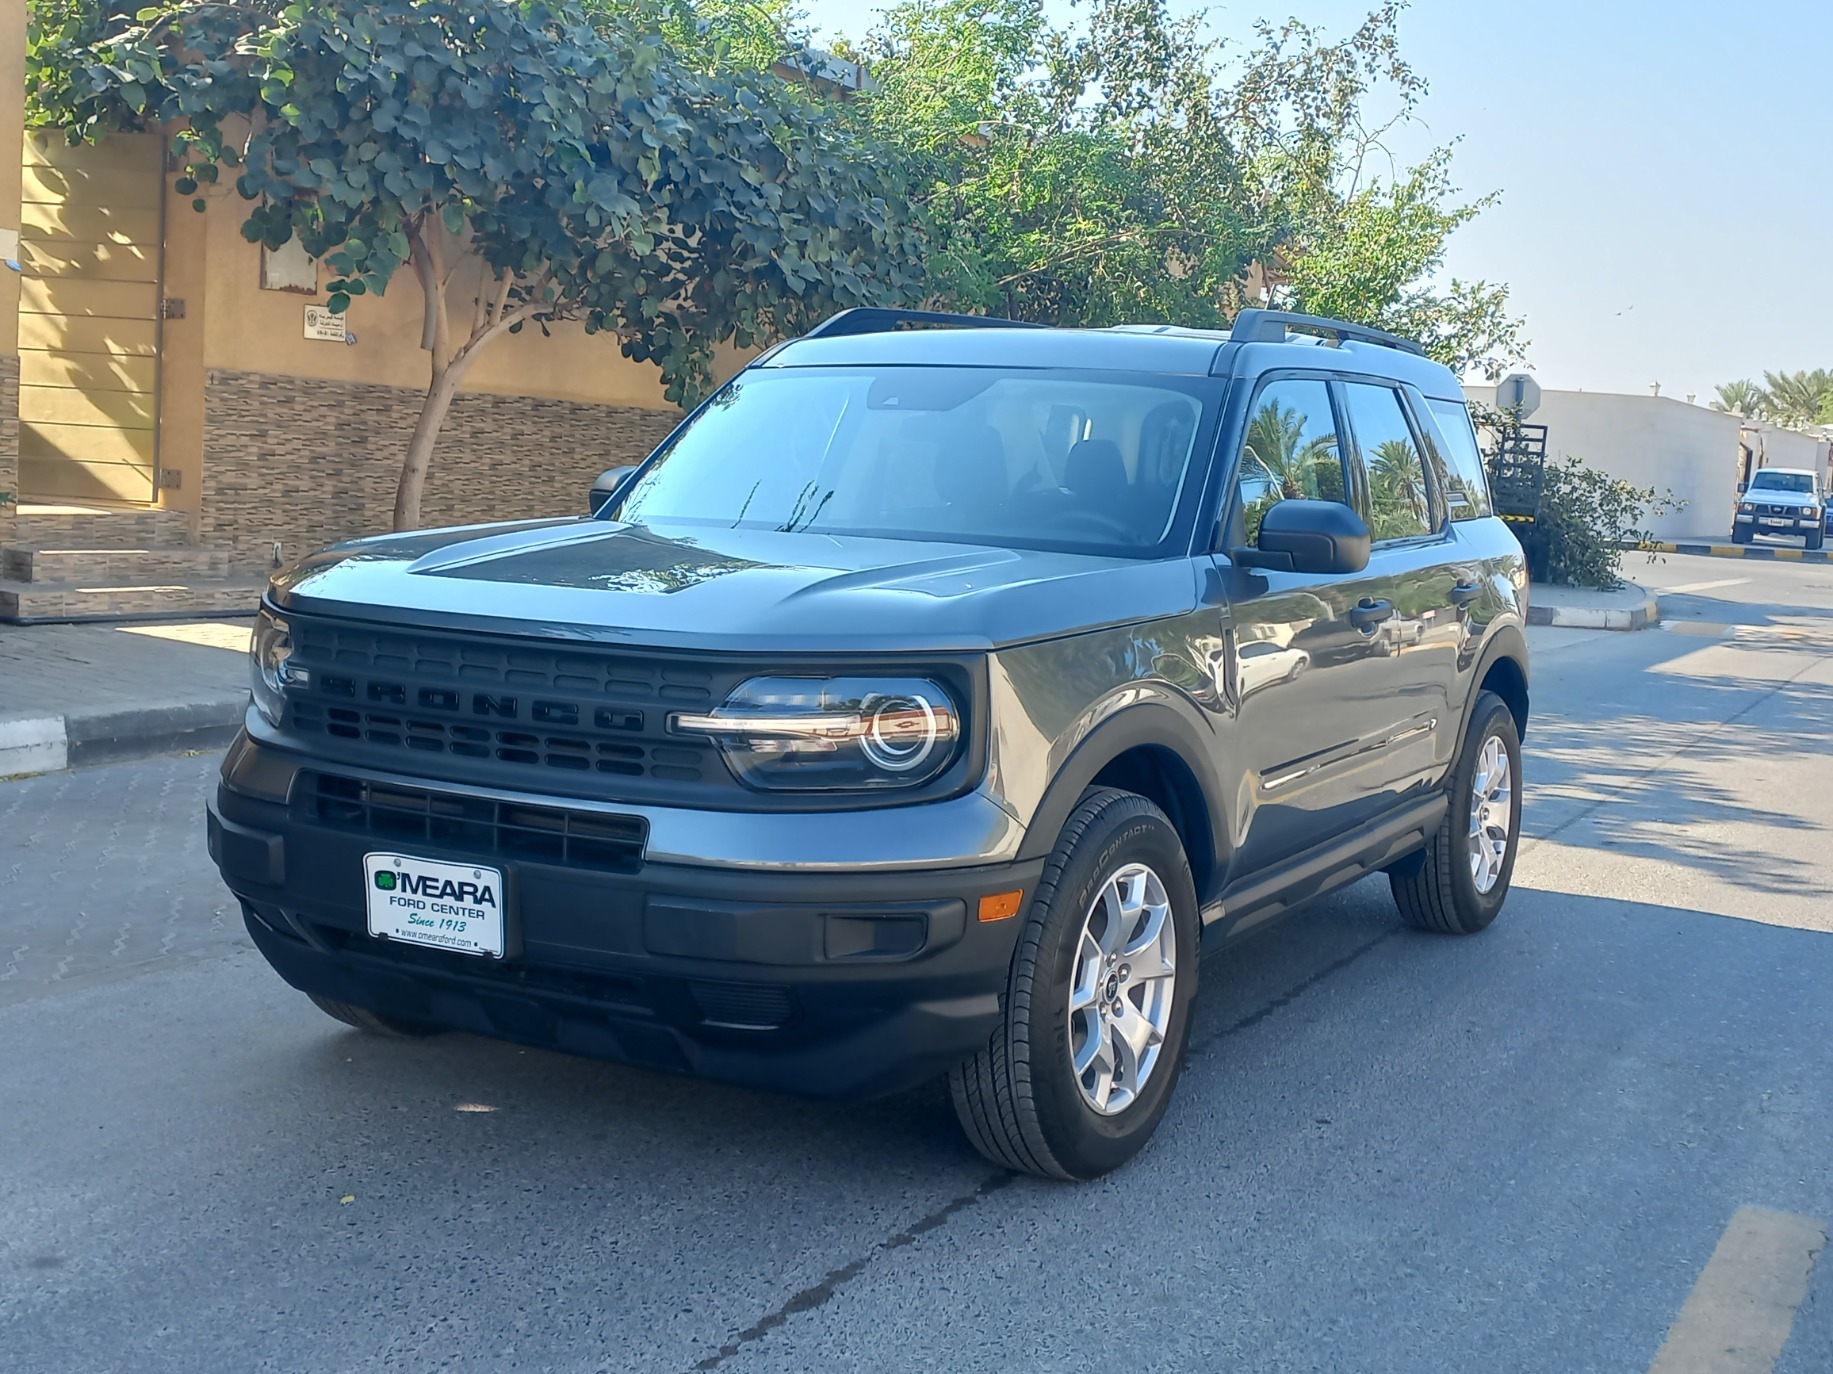 Used Ford Bronco 2022 Price in UAE, Specs and Reviews for Dubai, Abu